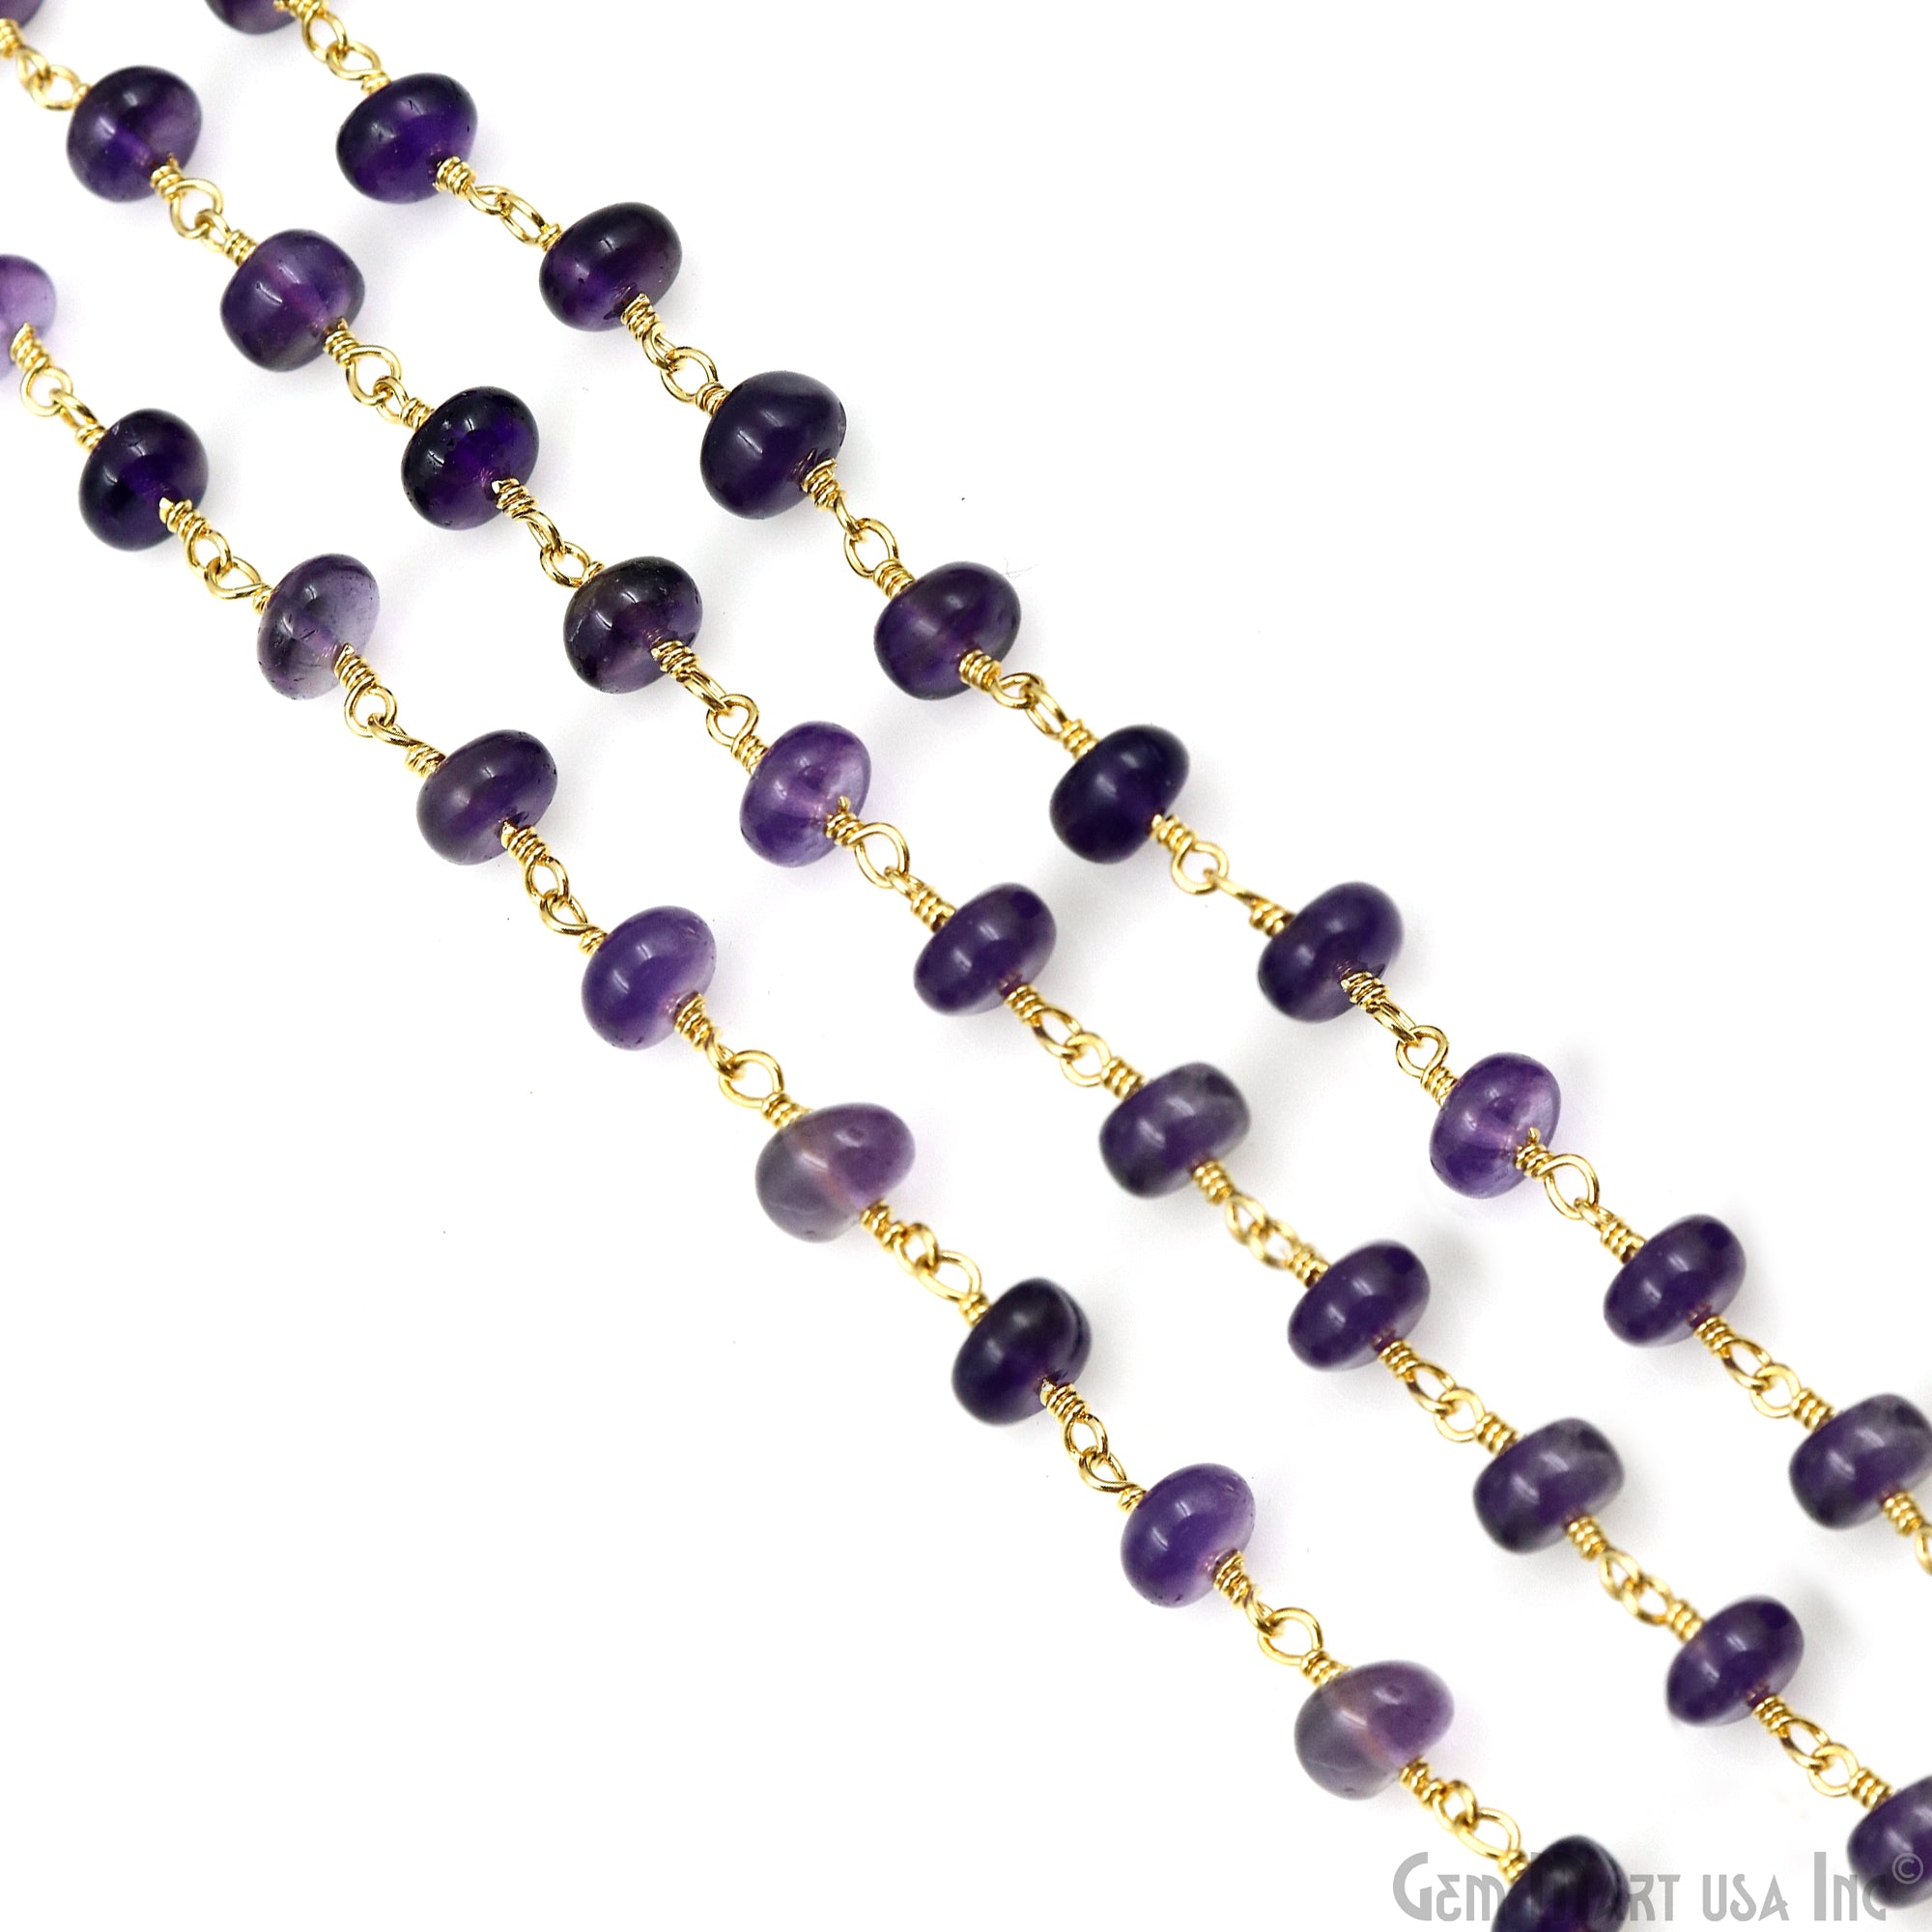 Amethyst Cabochon 5mm Faceted Beads Gold Wire Wrapped Beads Rosary Chain